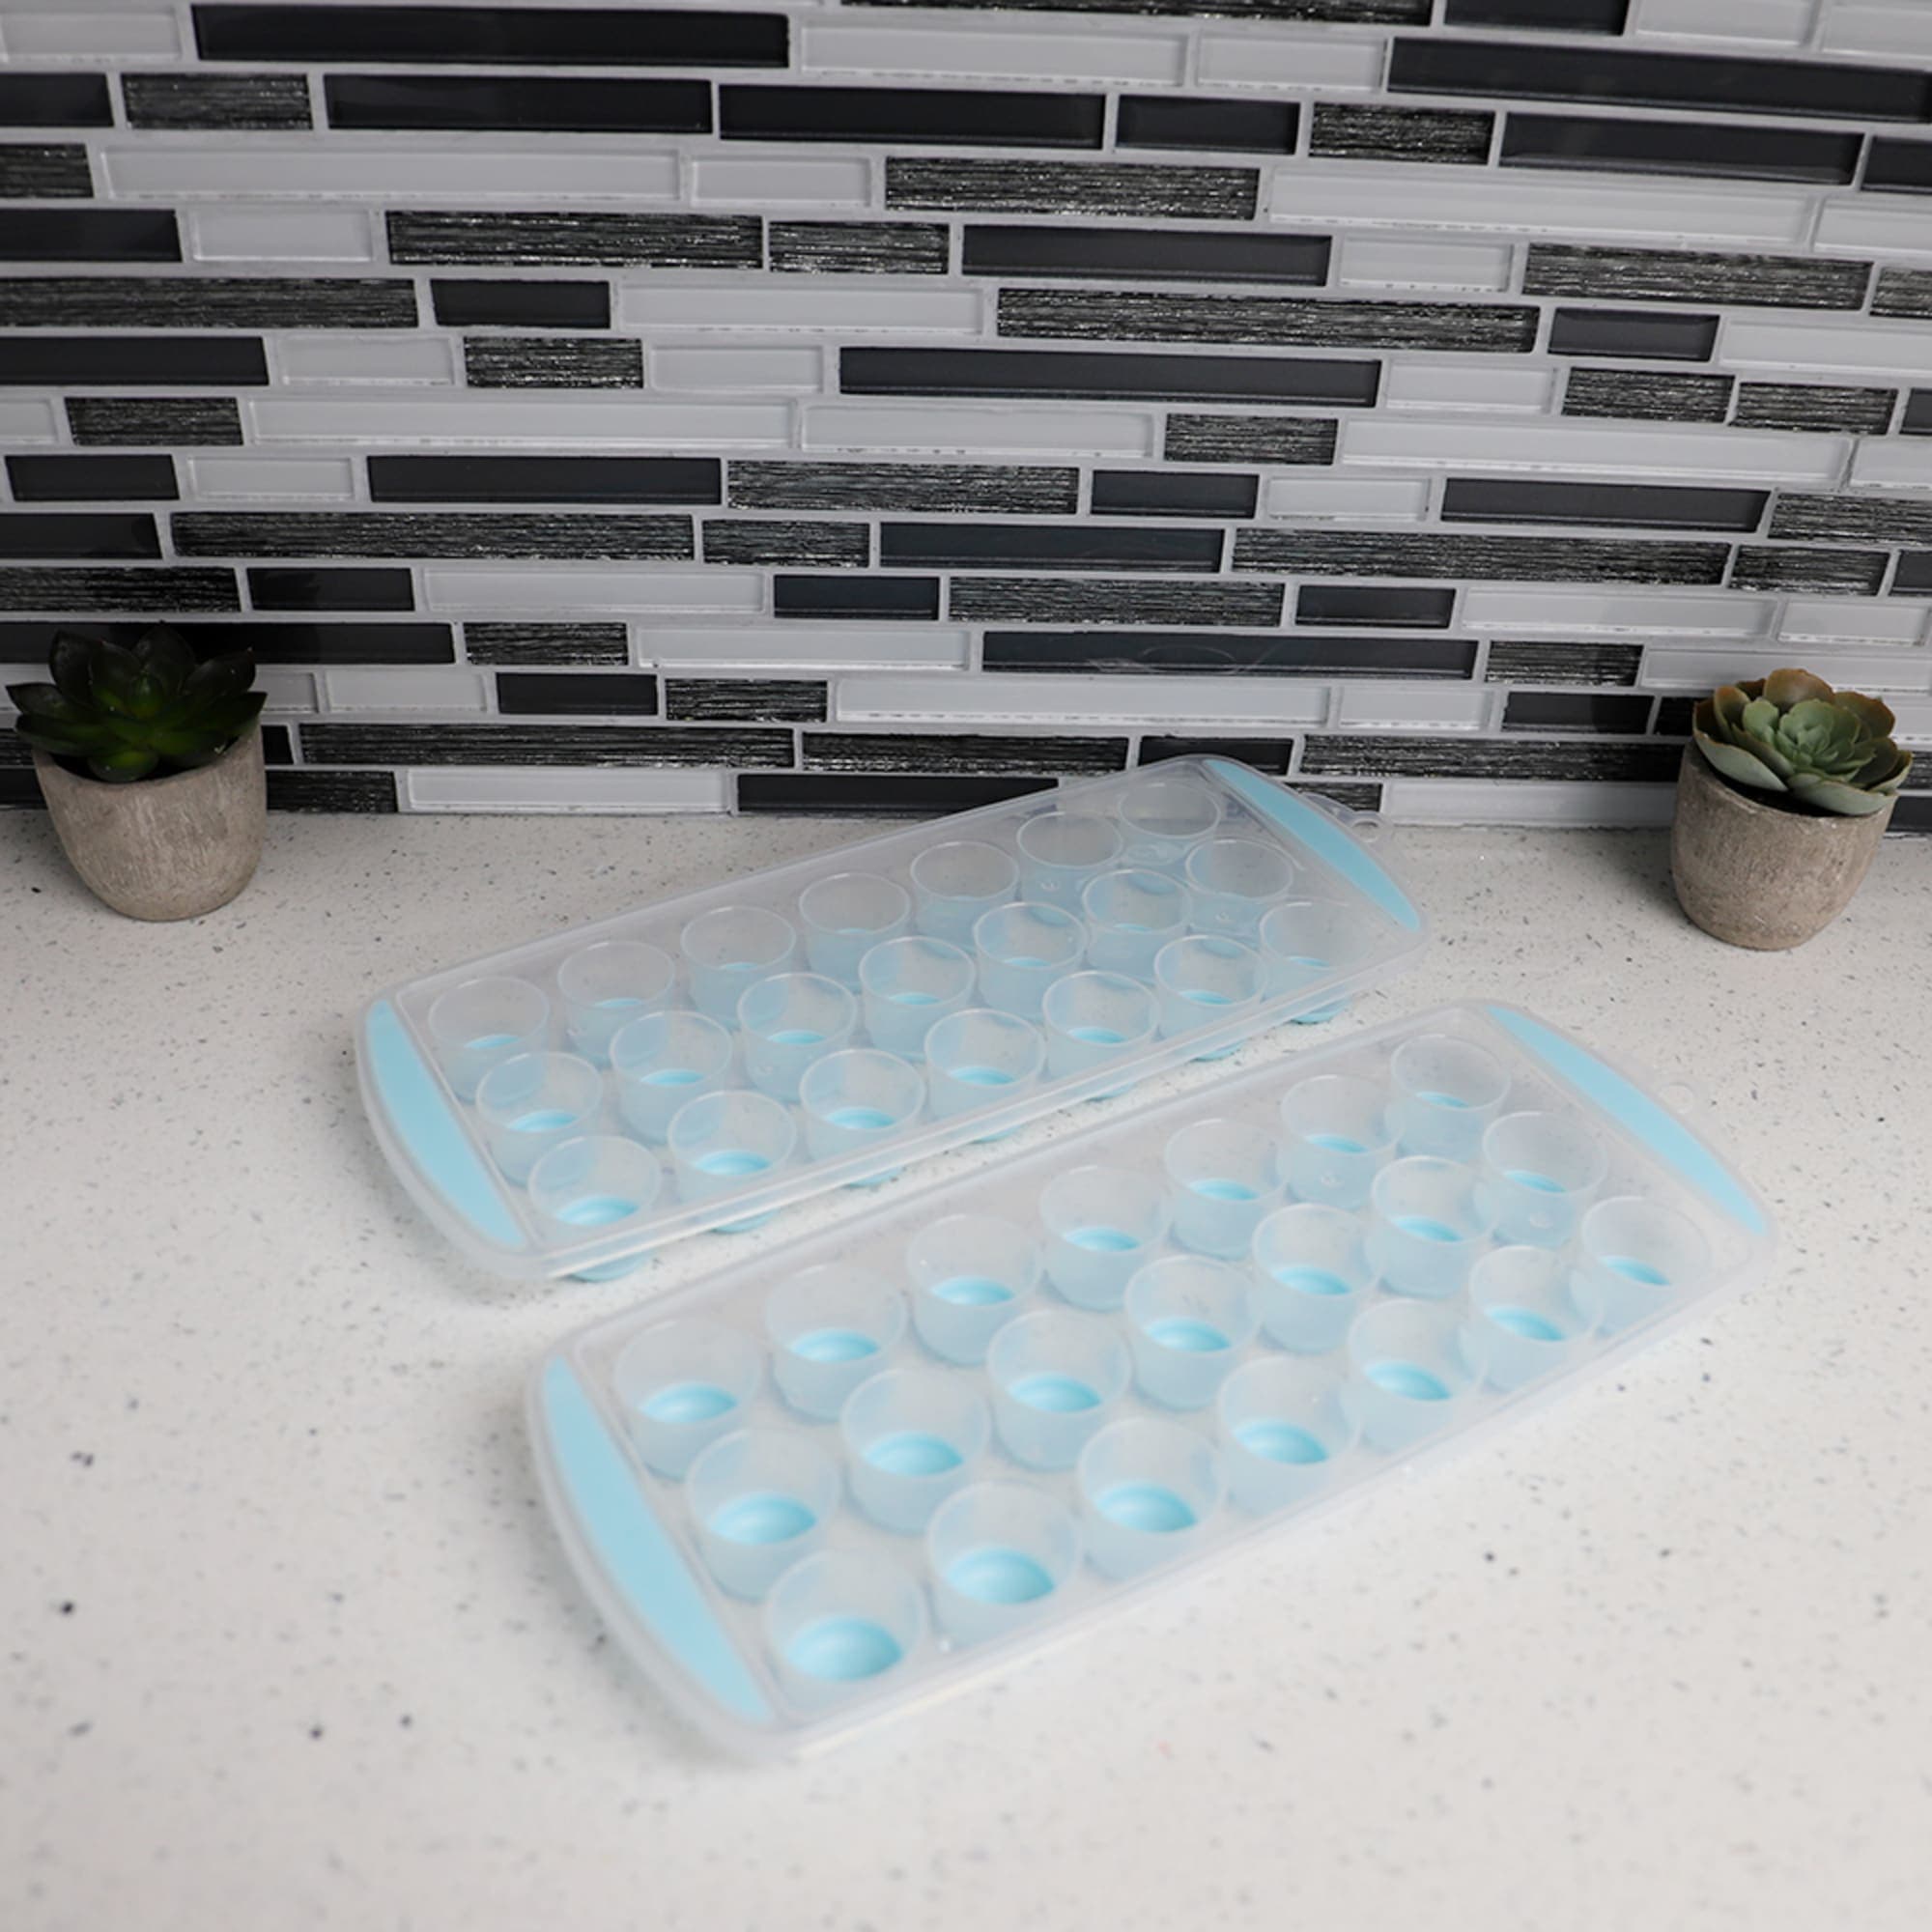 OXO Softworks No-spill Ice Cube Tray